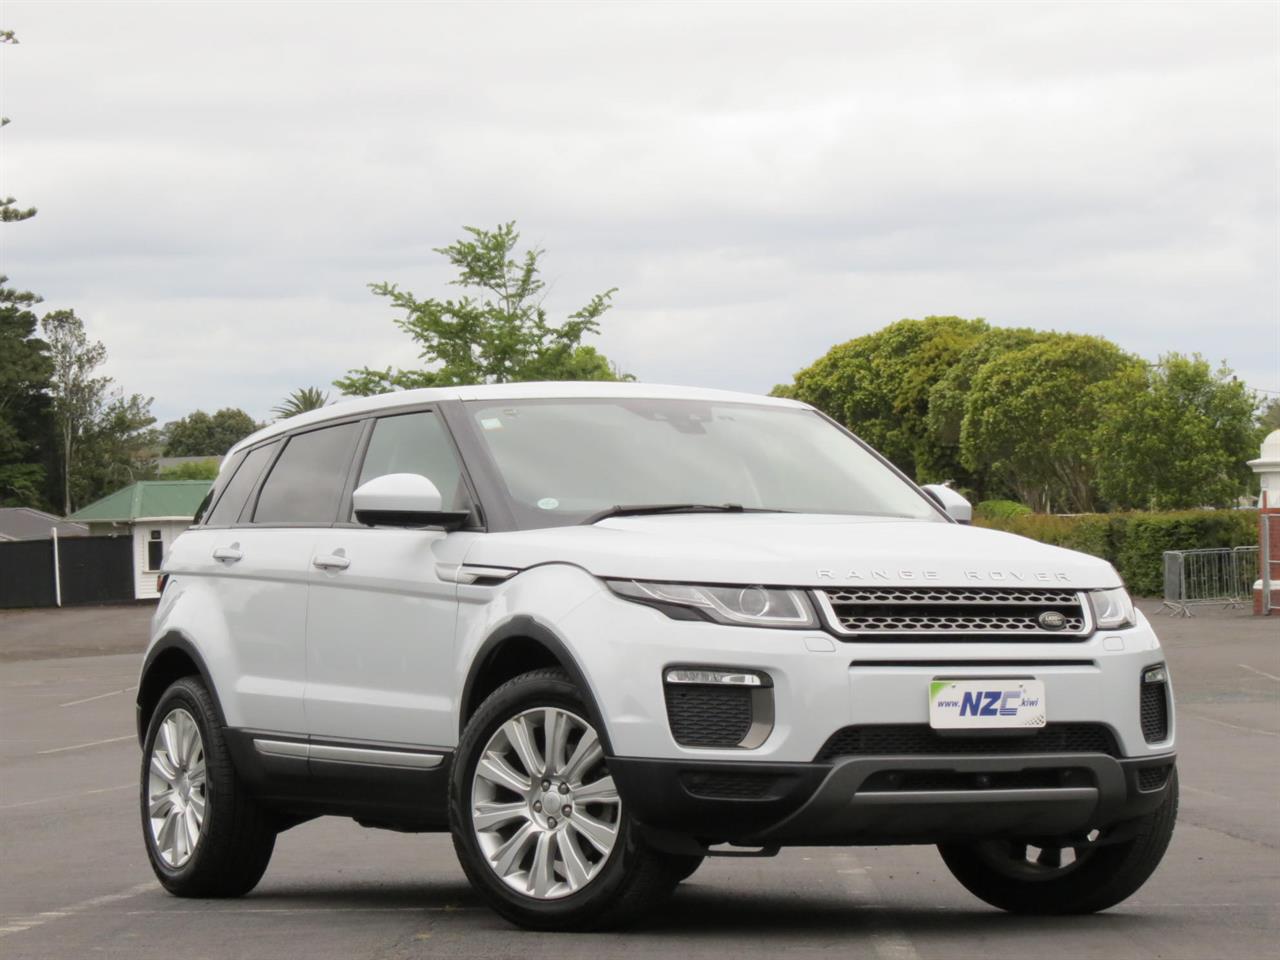 NZC 2016 Land Rover Range Rover Evoque just arrived to Auckland